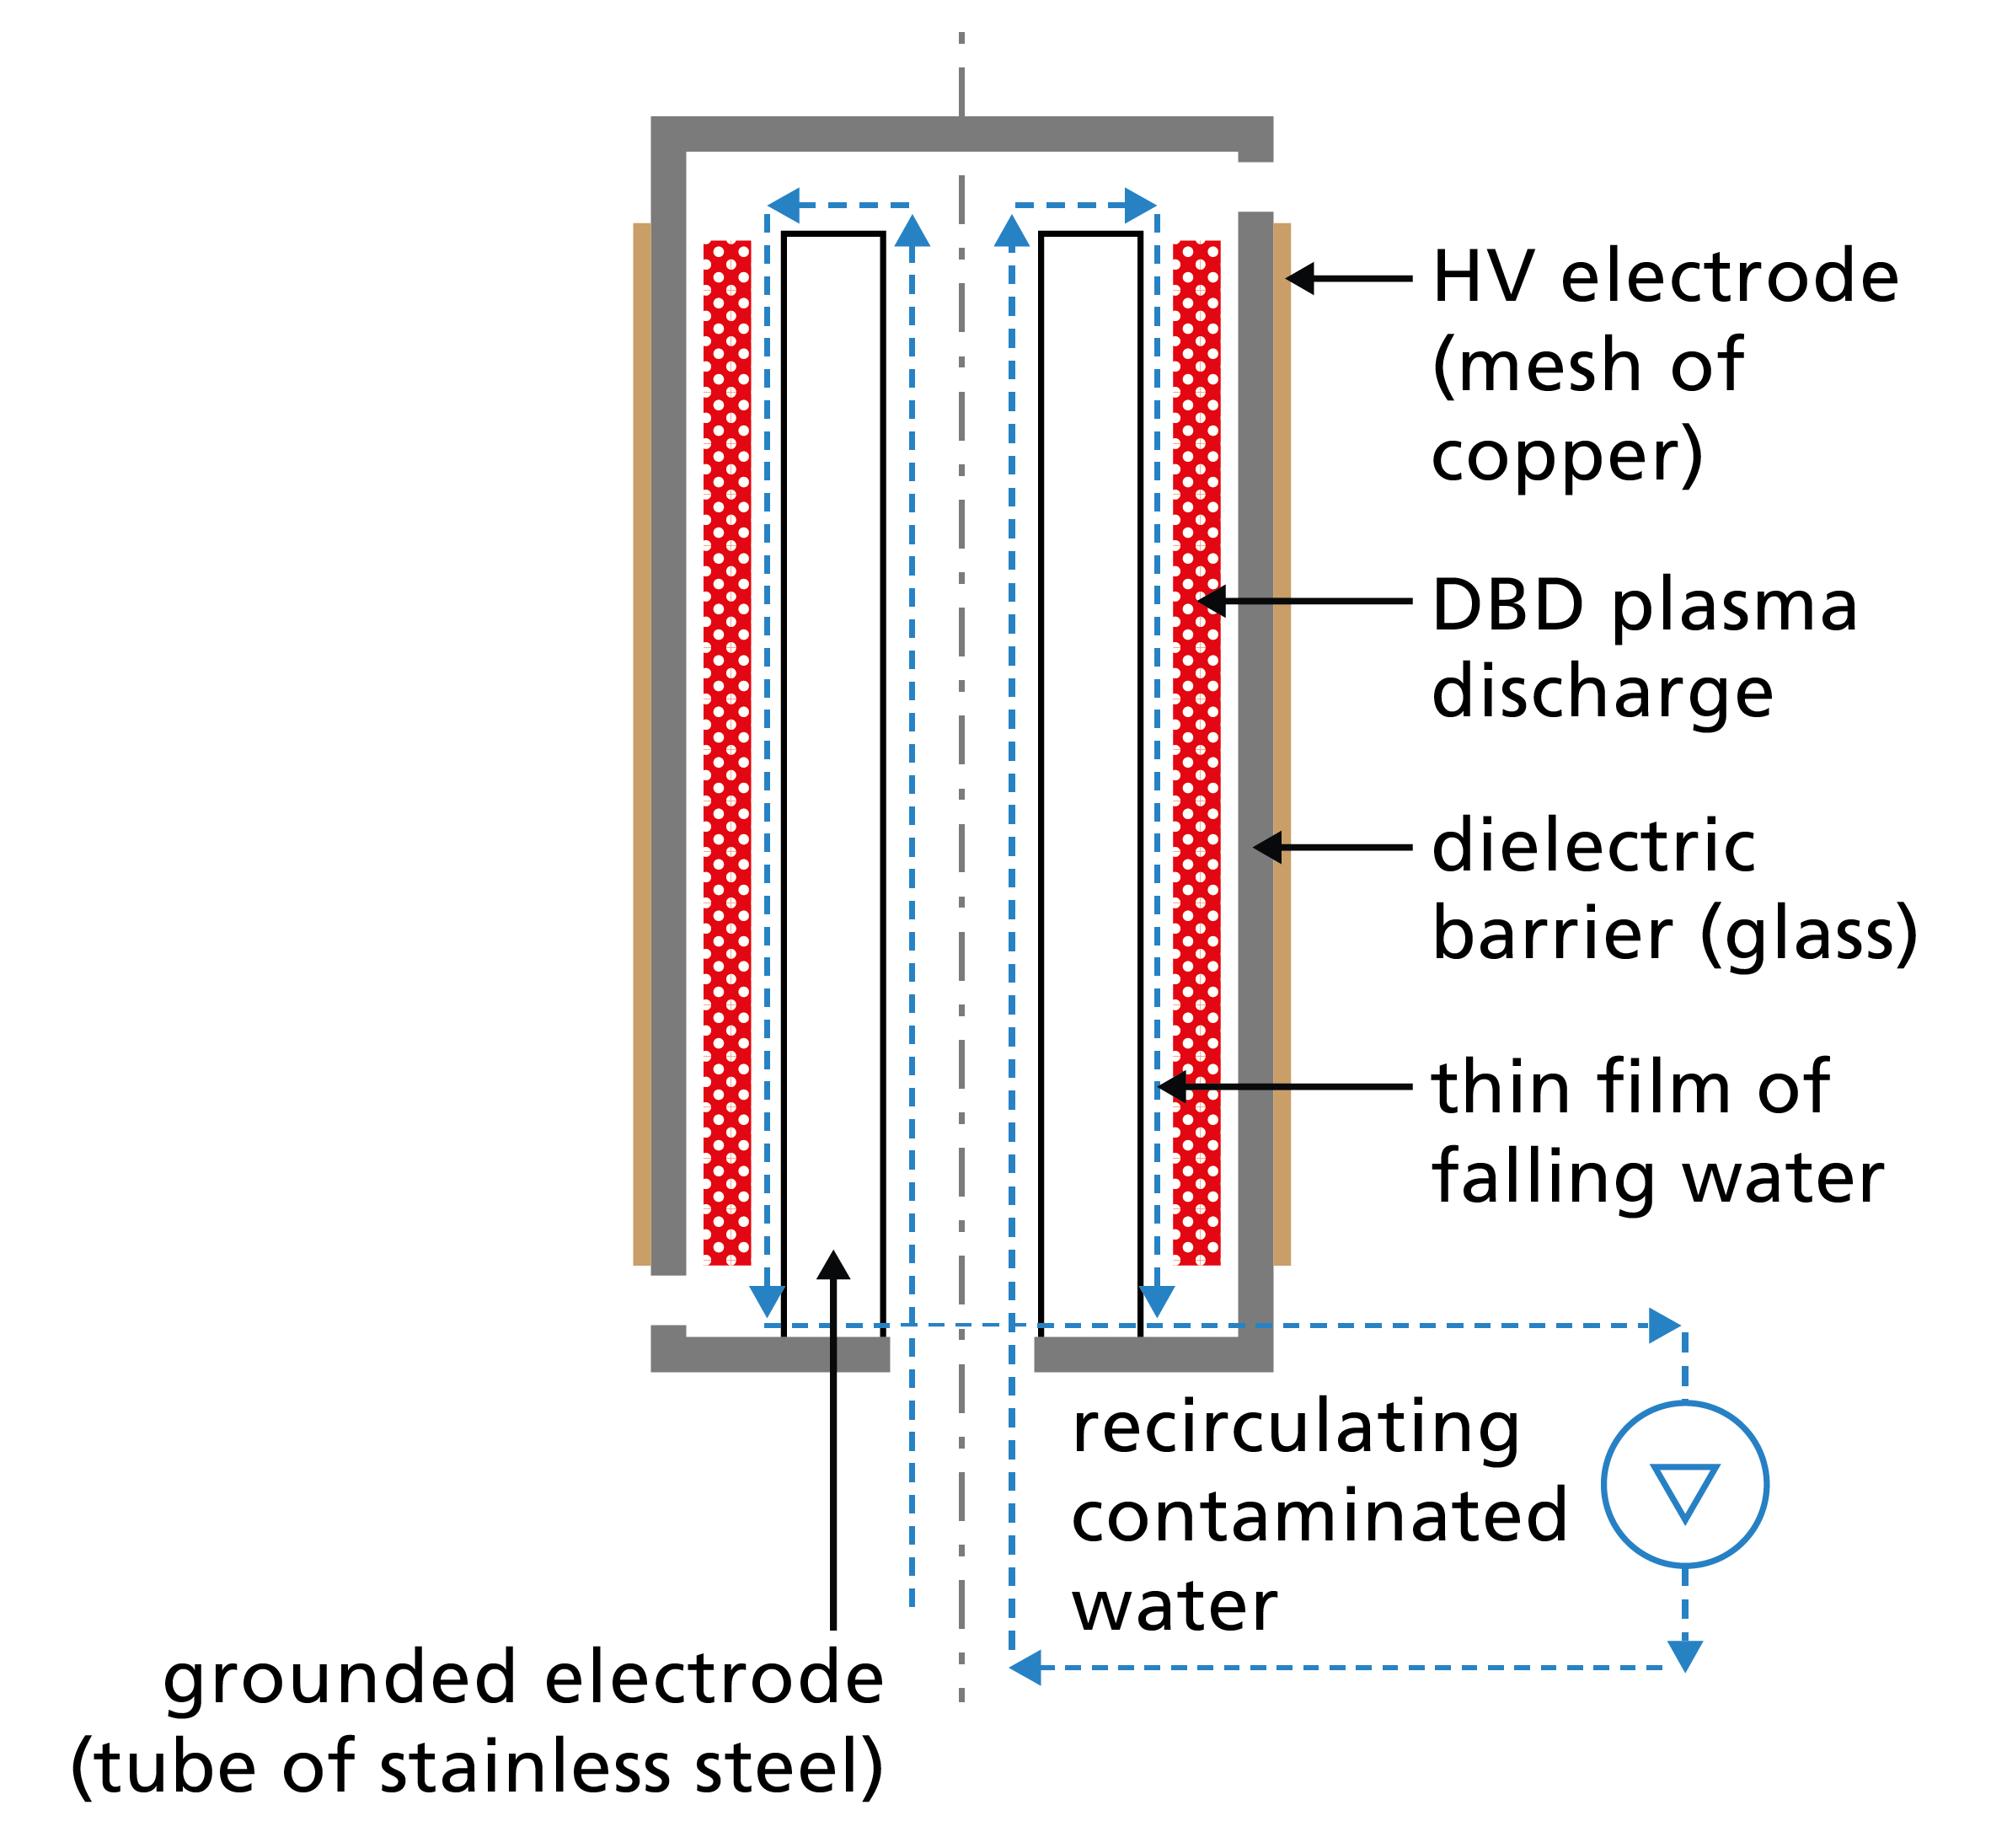 Plasma reactor: Plasma is created by applying voltage to the copper electrode. Contaminated water is pumped upwards and flows back down through a gap in the plasma discharge zone, attacking the PFAS in the process.